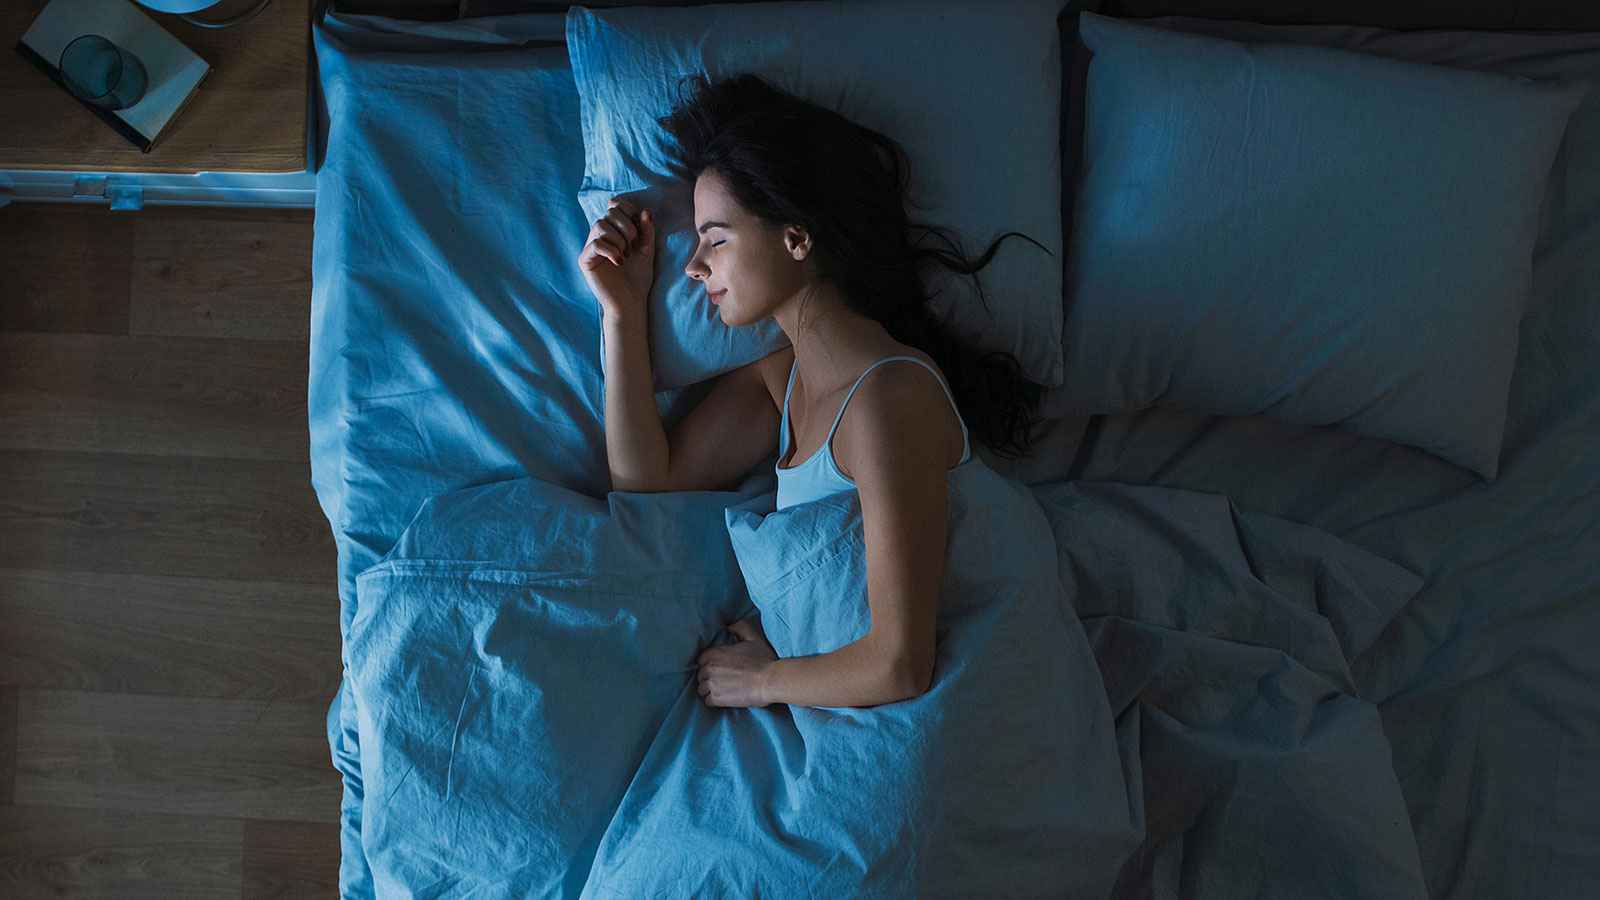 9 Things You Shouldn’t Do Before Going to Sleep